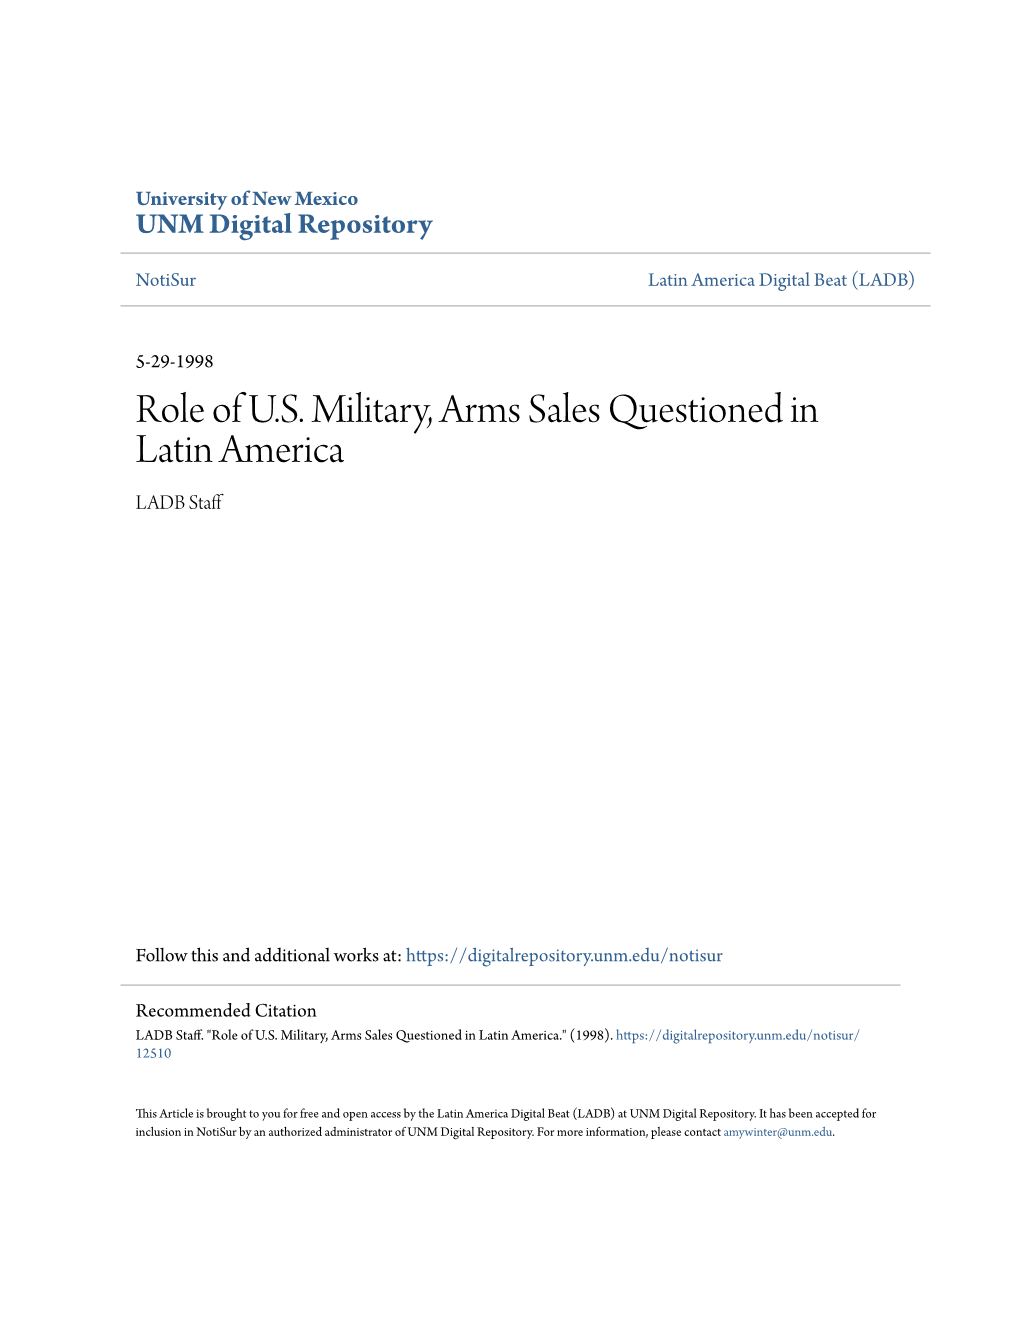 Role of U.S. Military, Arms Sales Questioned in Latin America LADB Staff